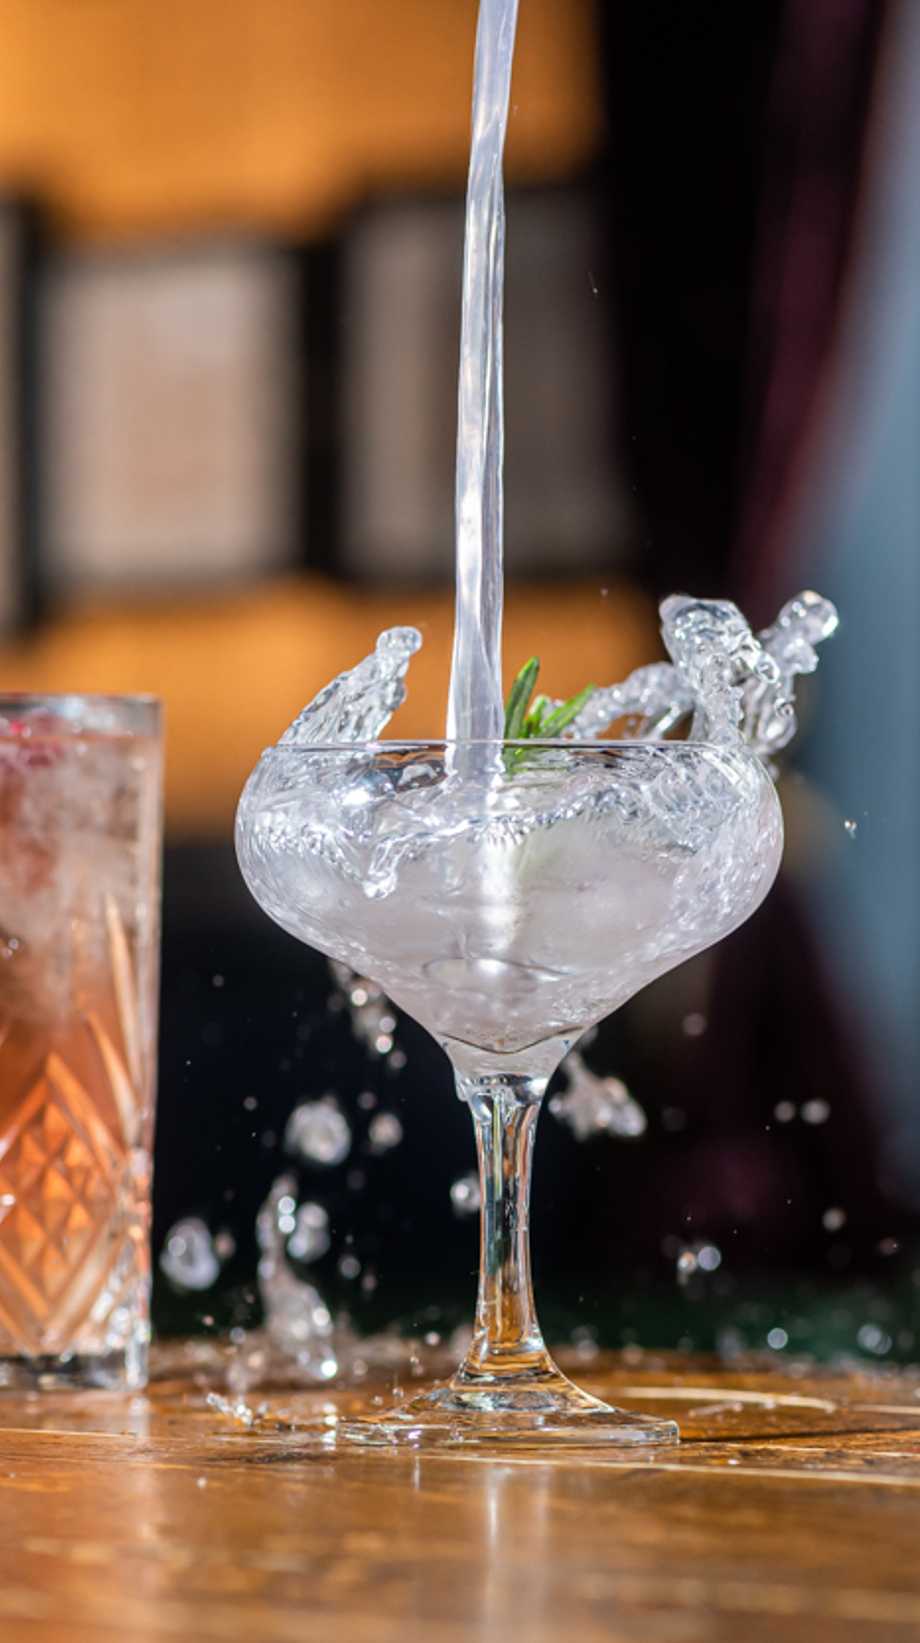 A cocktail is being poured from high above, creating a dramatic effect of ice and droplets outside the glass.